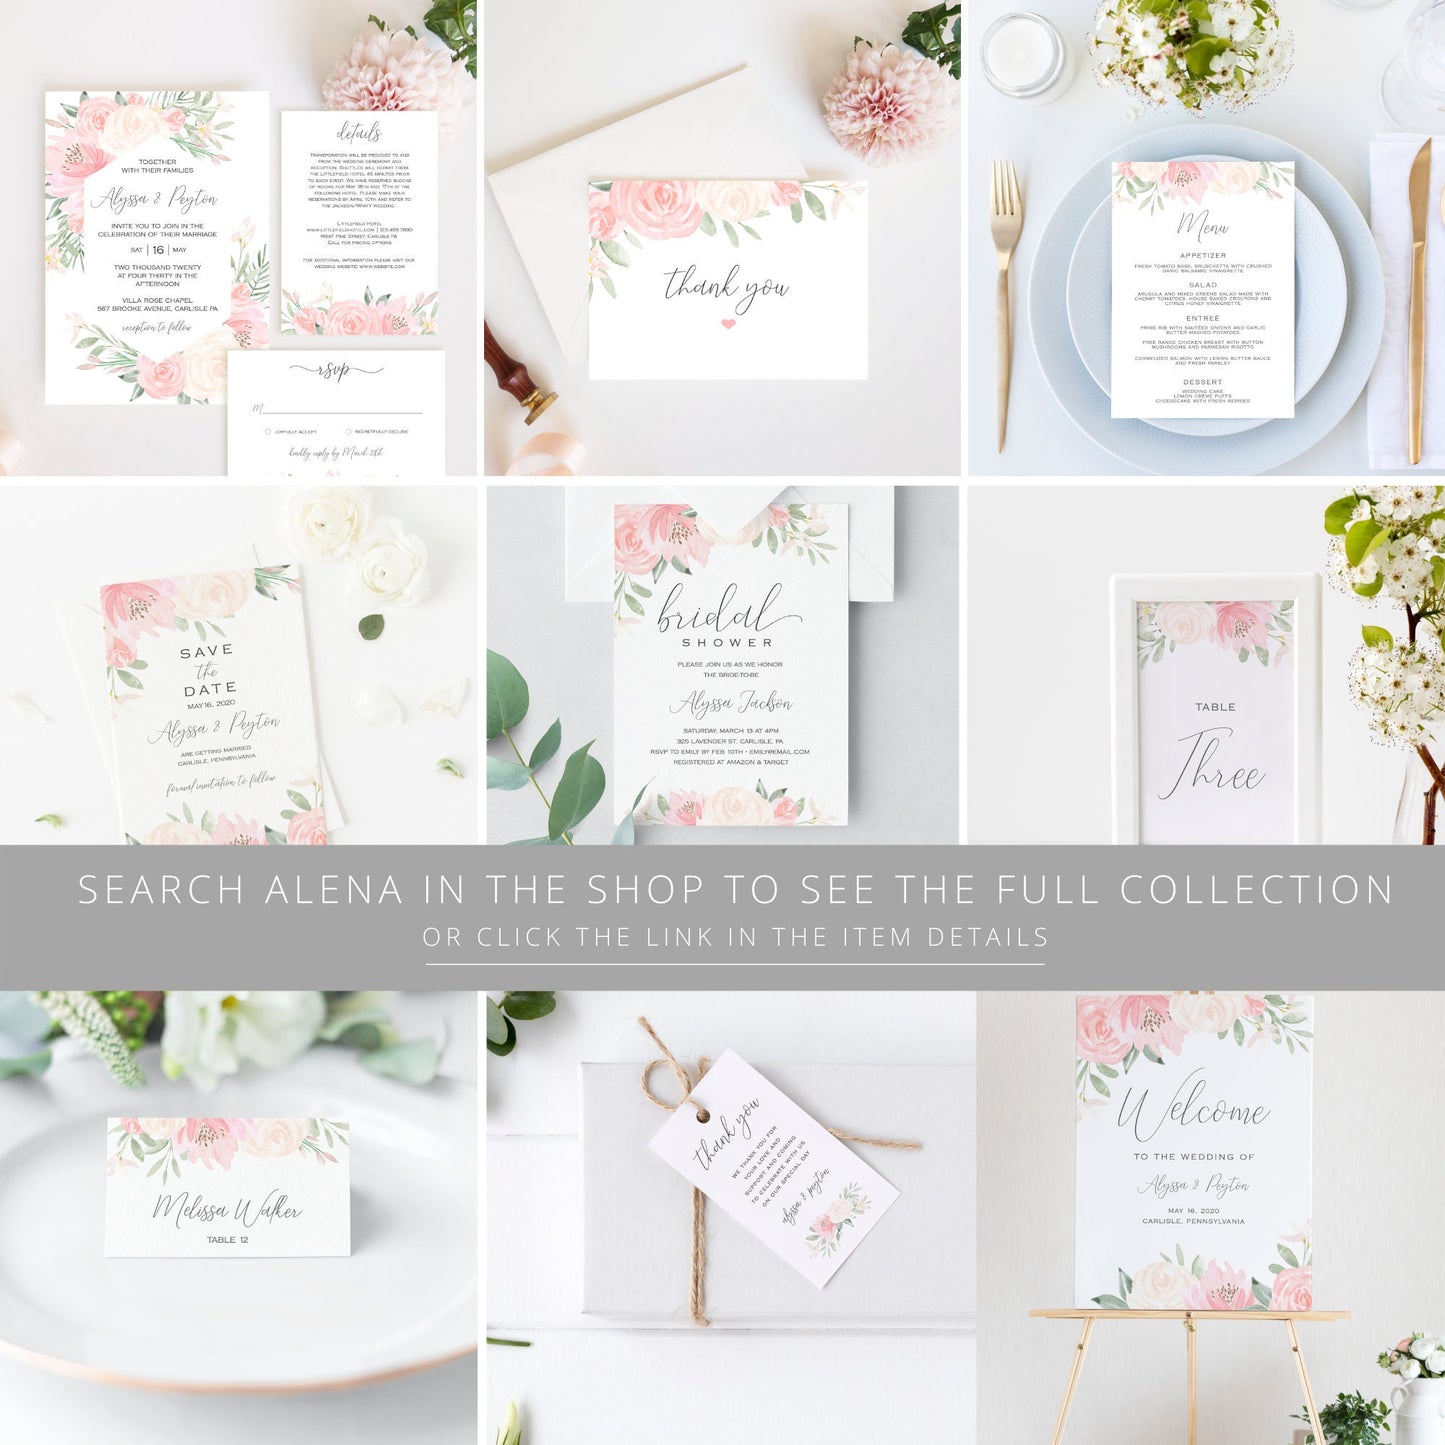 Editable Wedding Thank You Cards Cards Personalized Bridal Shower Thank You Cards Blush Floral Template